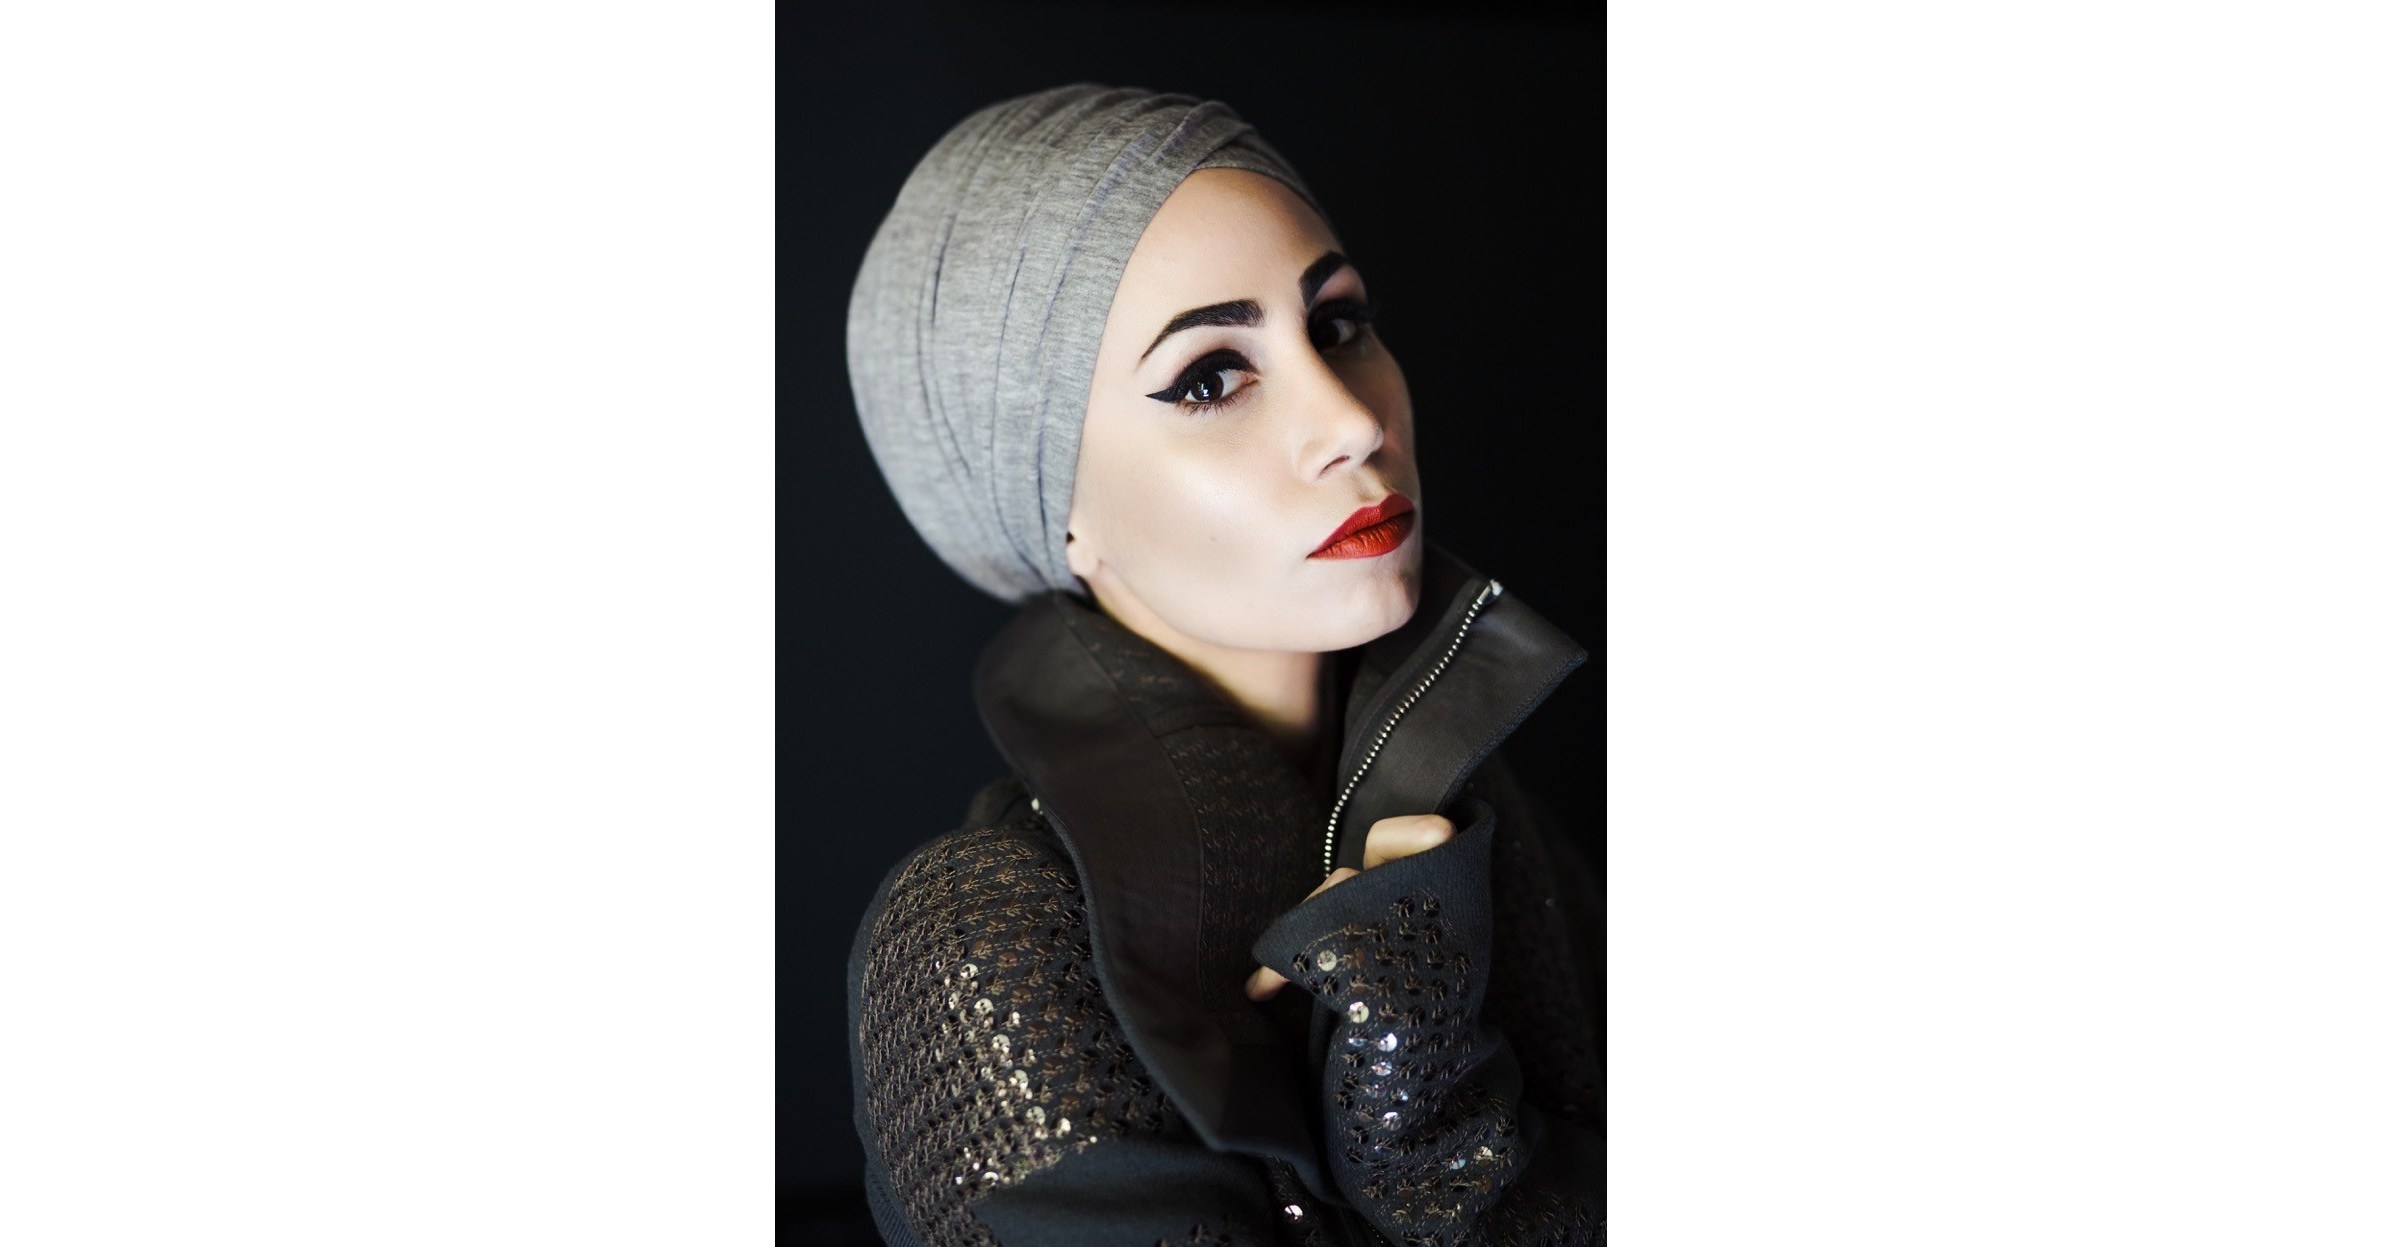 Tahereh Mafi has published 12 books in 10 years - Muslims Doing Things  (podcast)